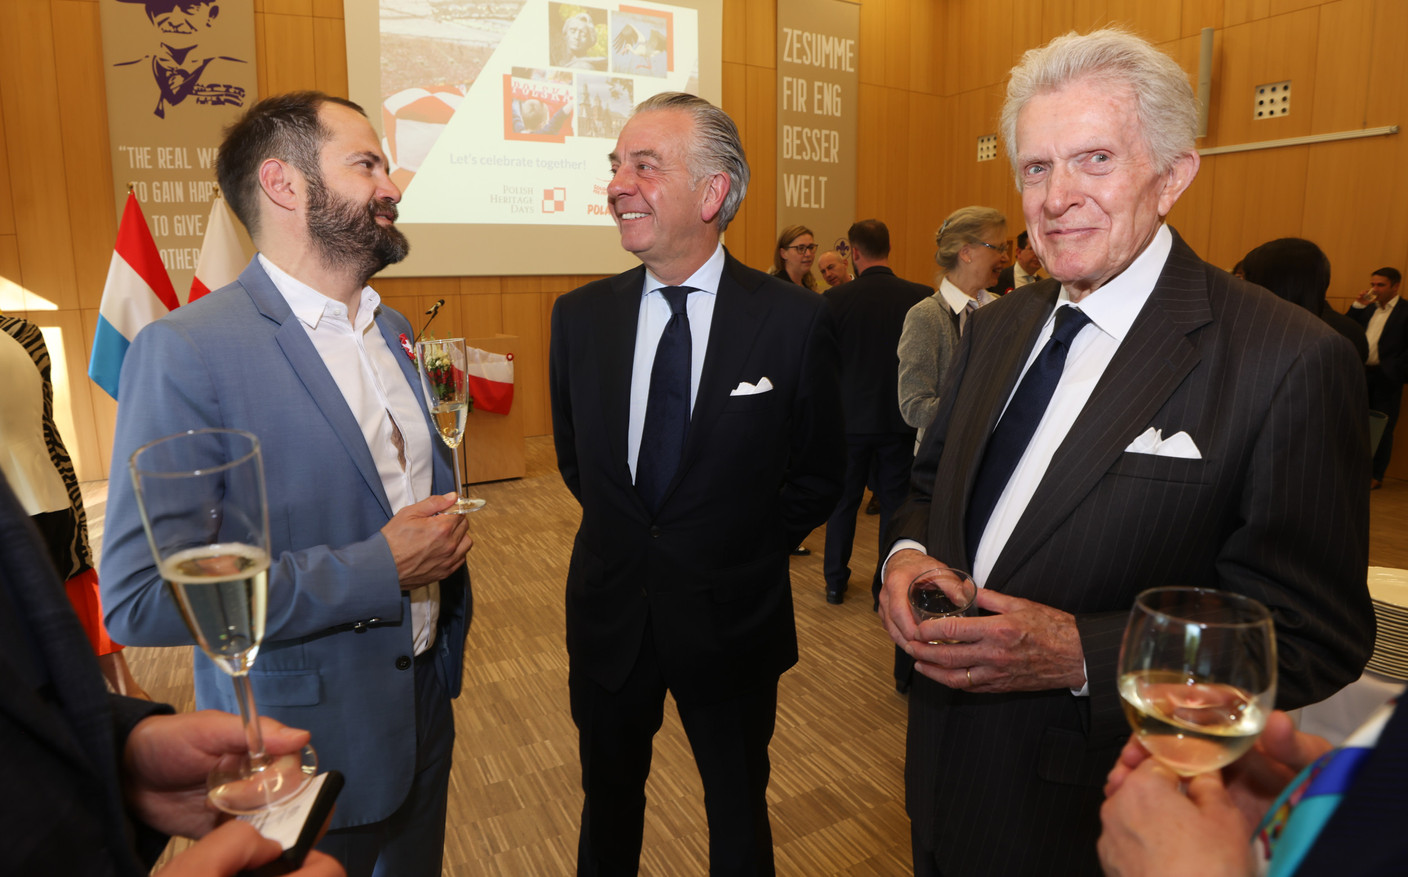 Gabriel Boisante, Bob Kneip and Victor Kneip at the 3rd May Constitution Day event. Photo: Guy Wolff/Maison Moderne